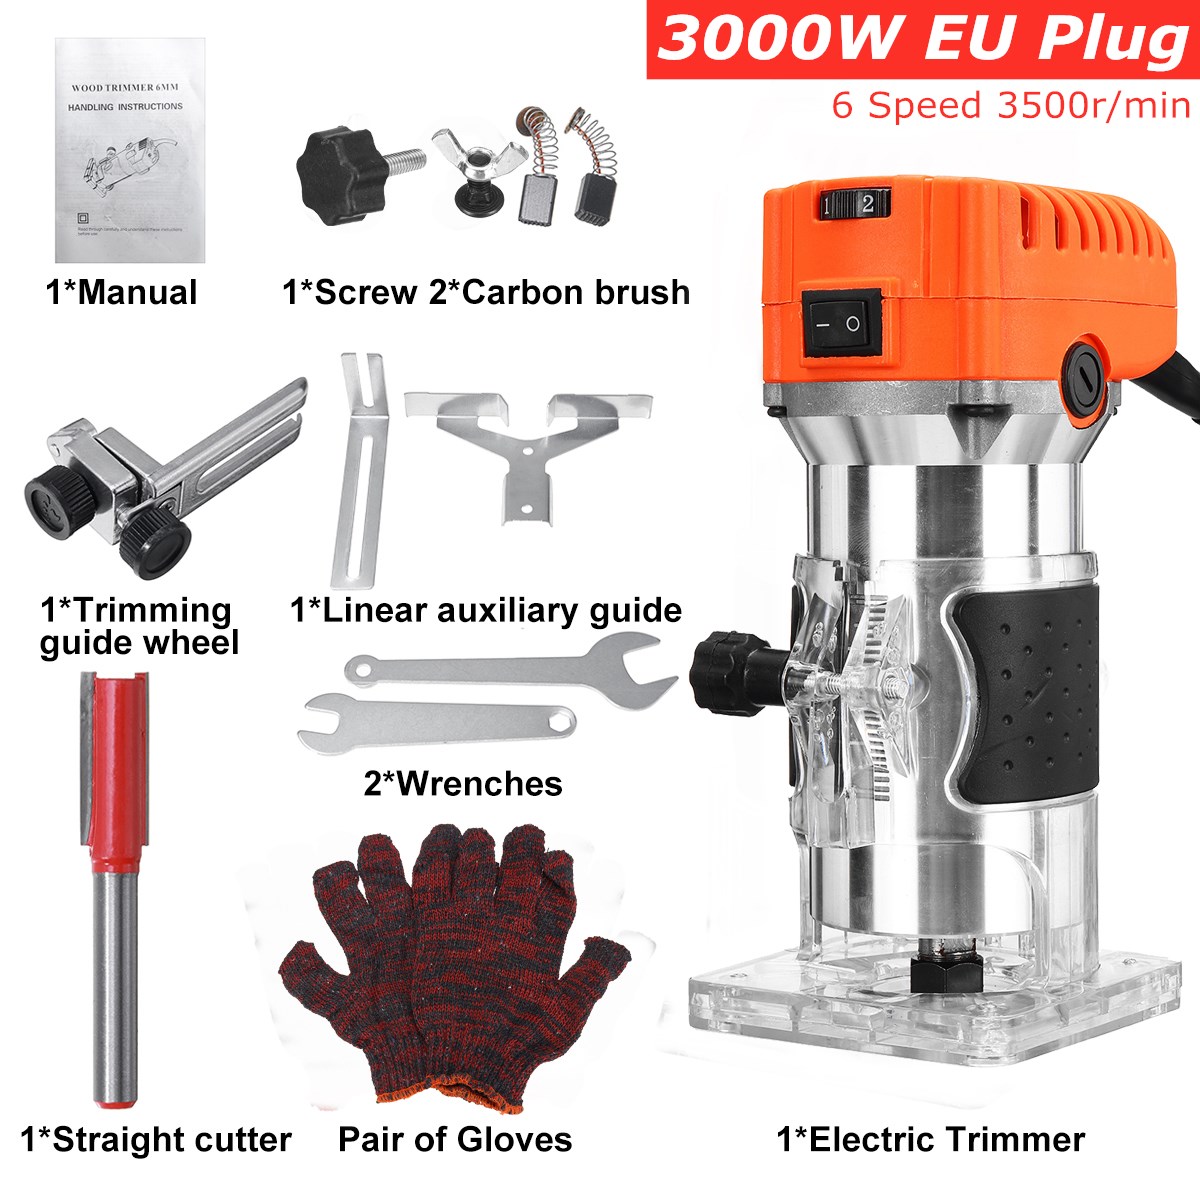 1280W-Wood-Palm-Router-Tool-Hand-Edge-Trimmer-WoodWorking-Joiner-Cutting-Palmming-Tool-6-Speeds-3500-1937521-2